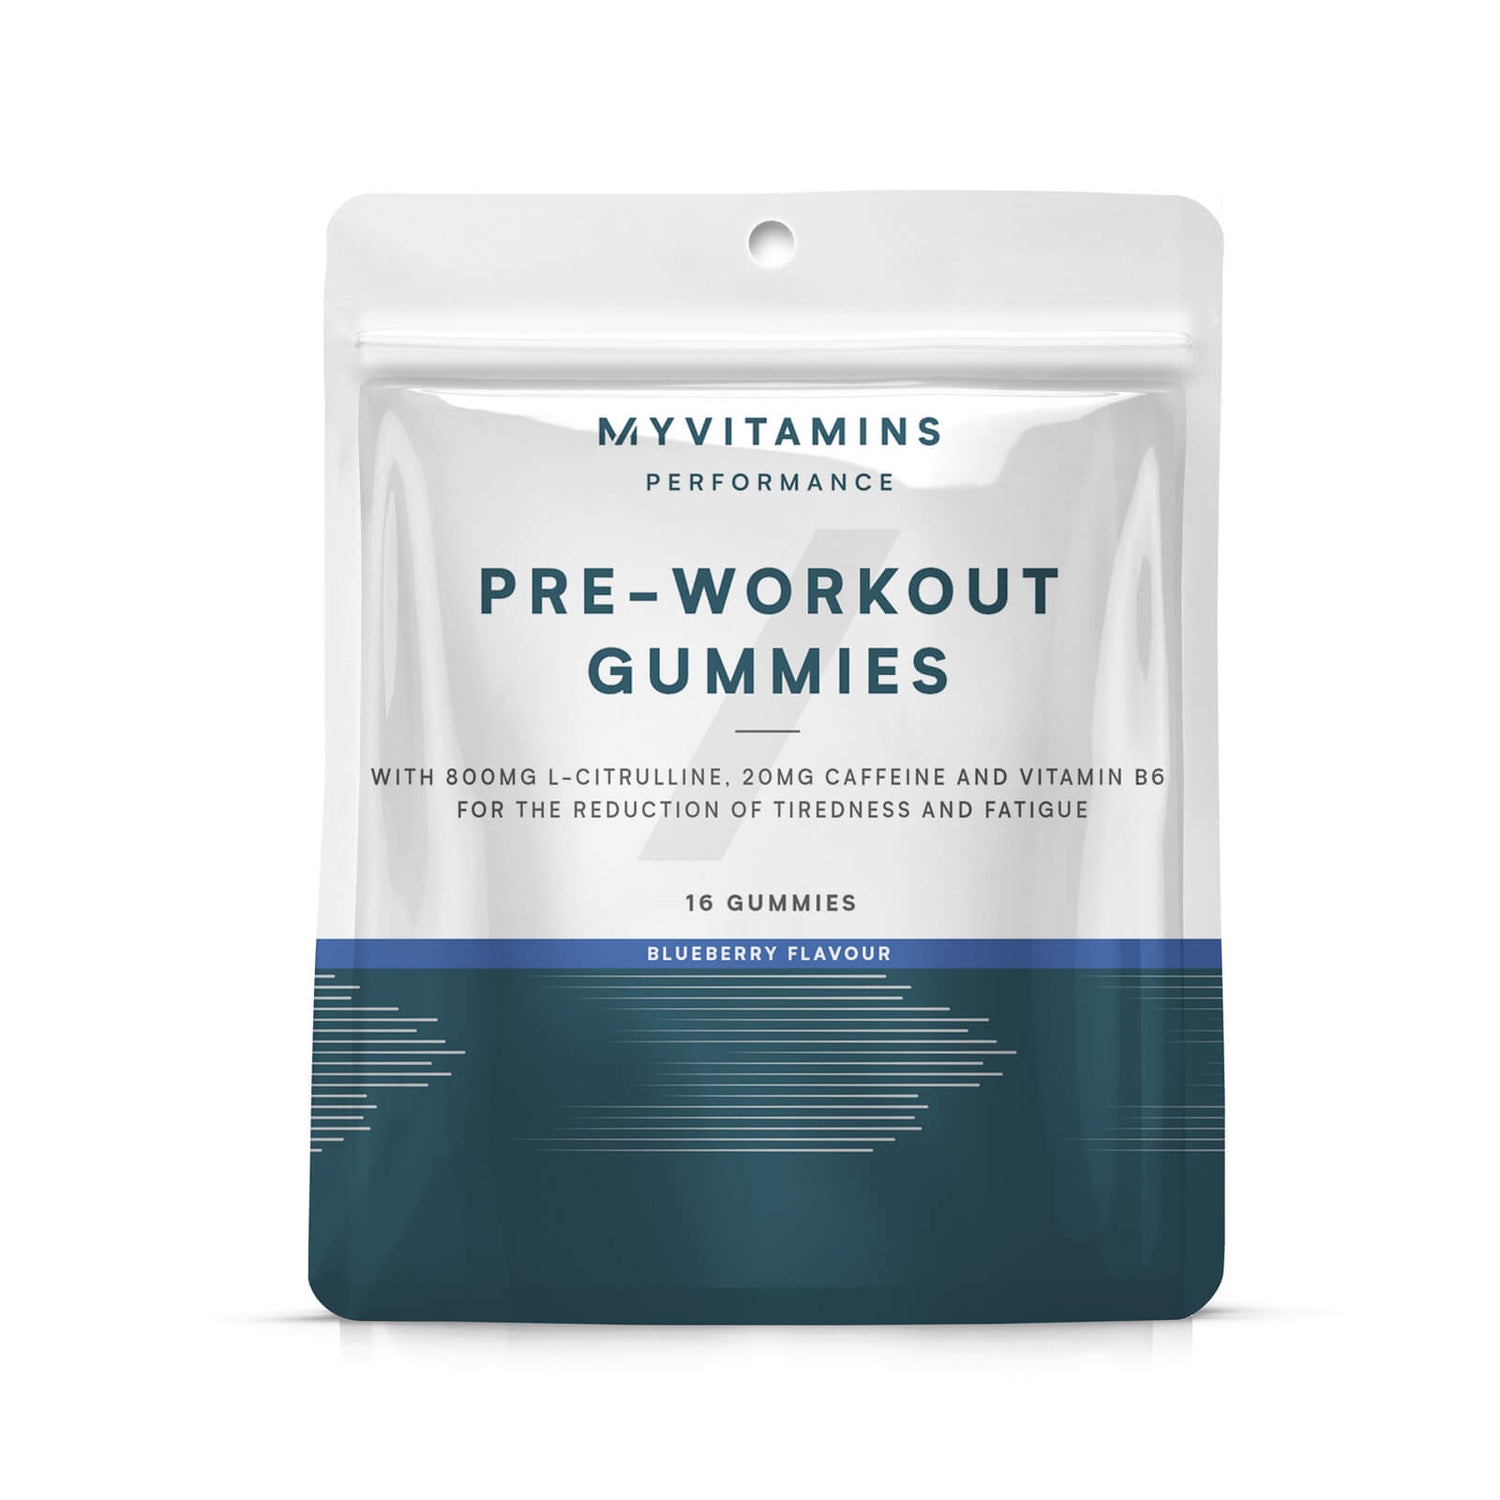 Pre-Workout Gummies - Sample Pouch - Ny - Blueberry